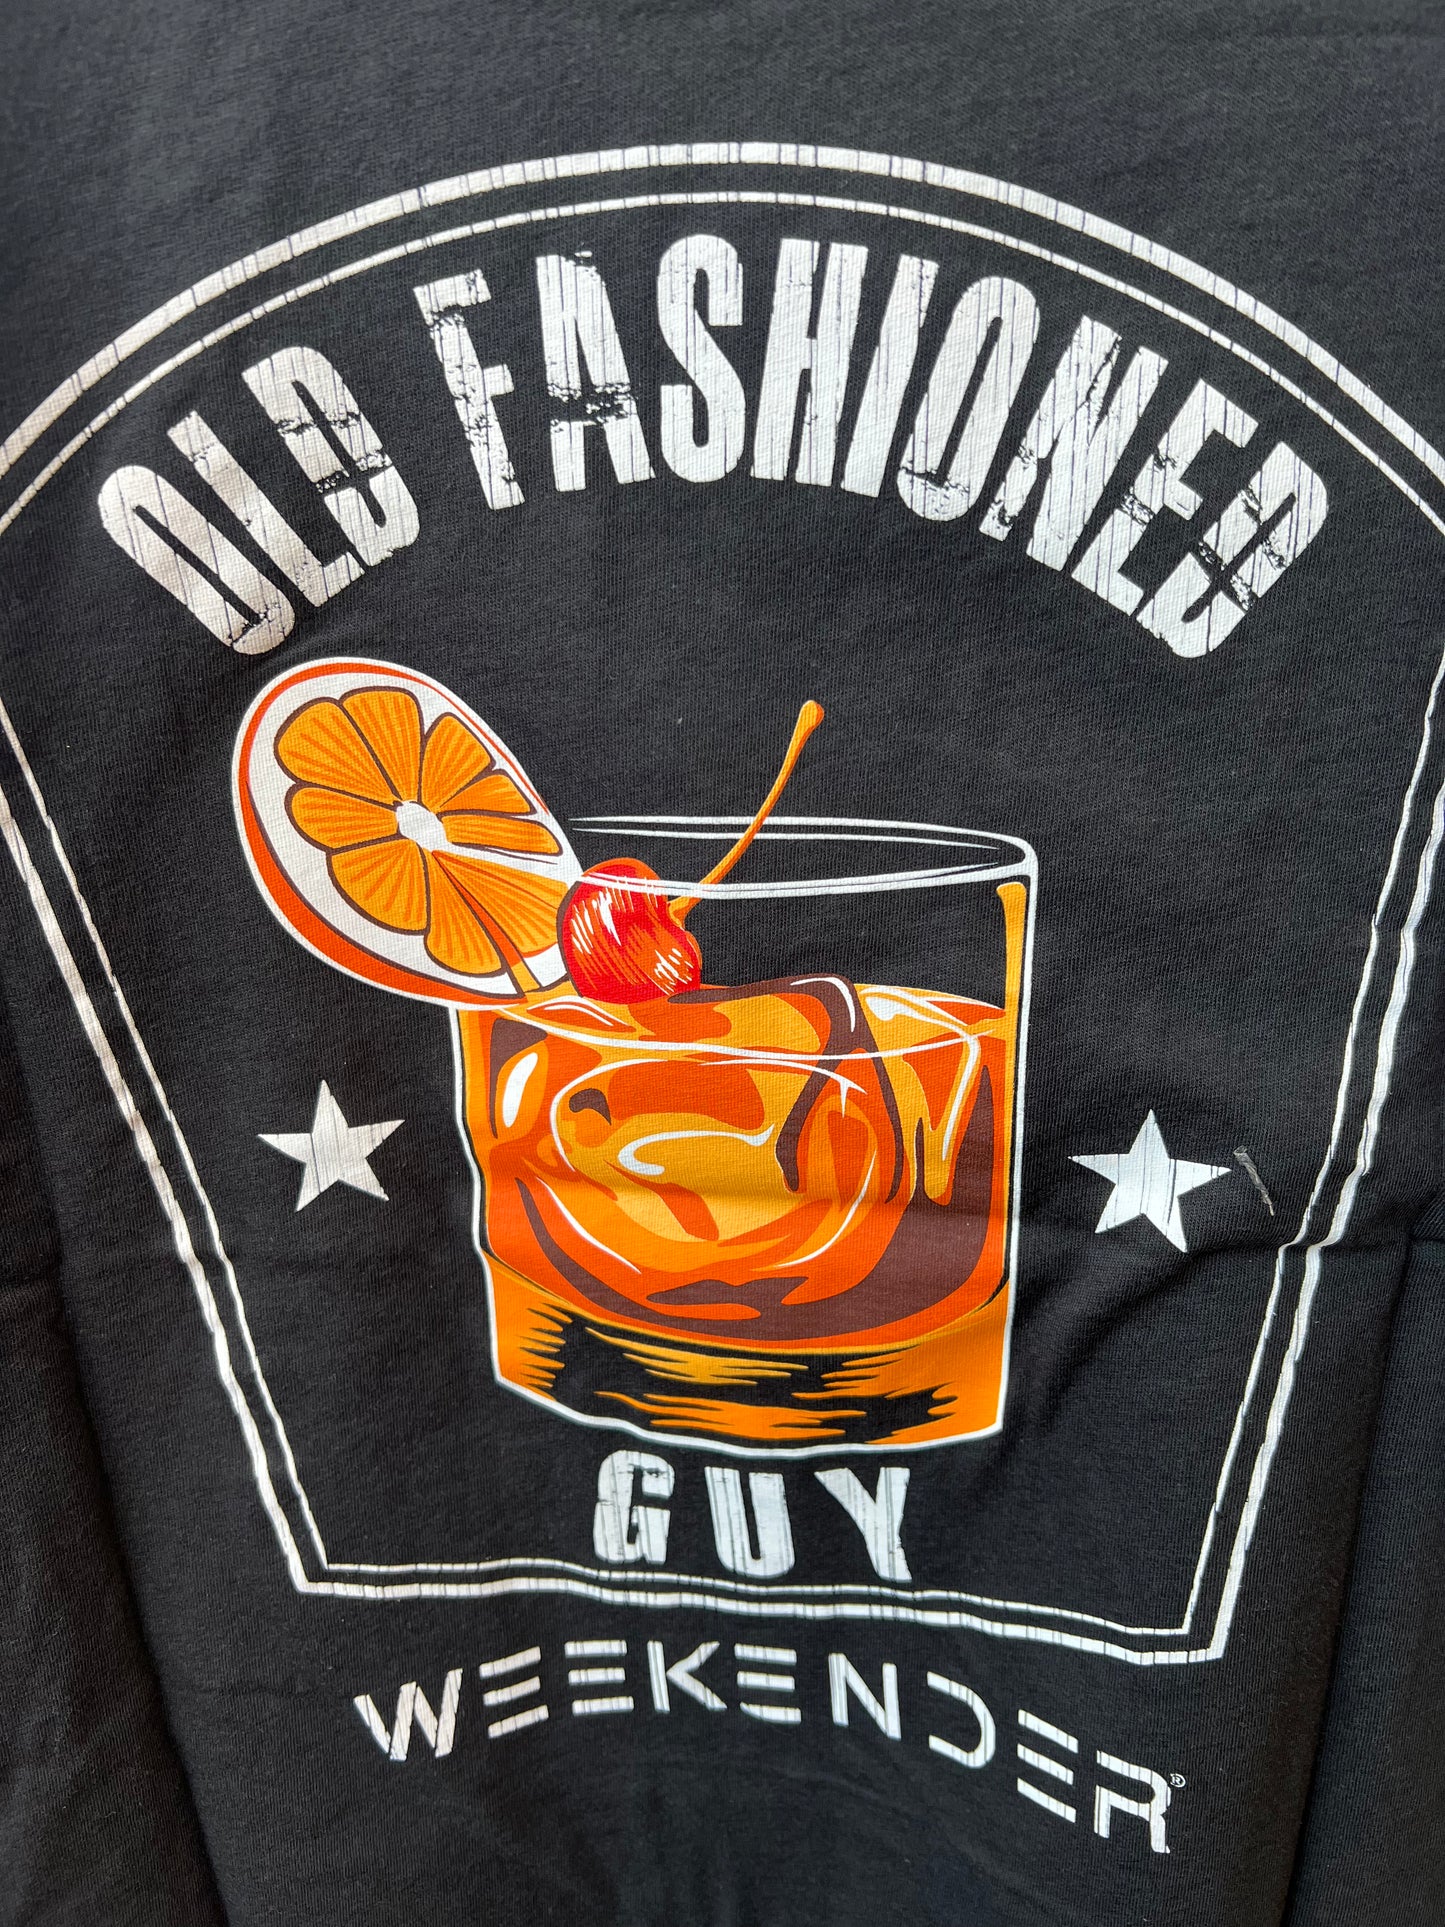 Hook & Tackle Old Fashioned Guy T-shirt